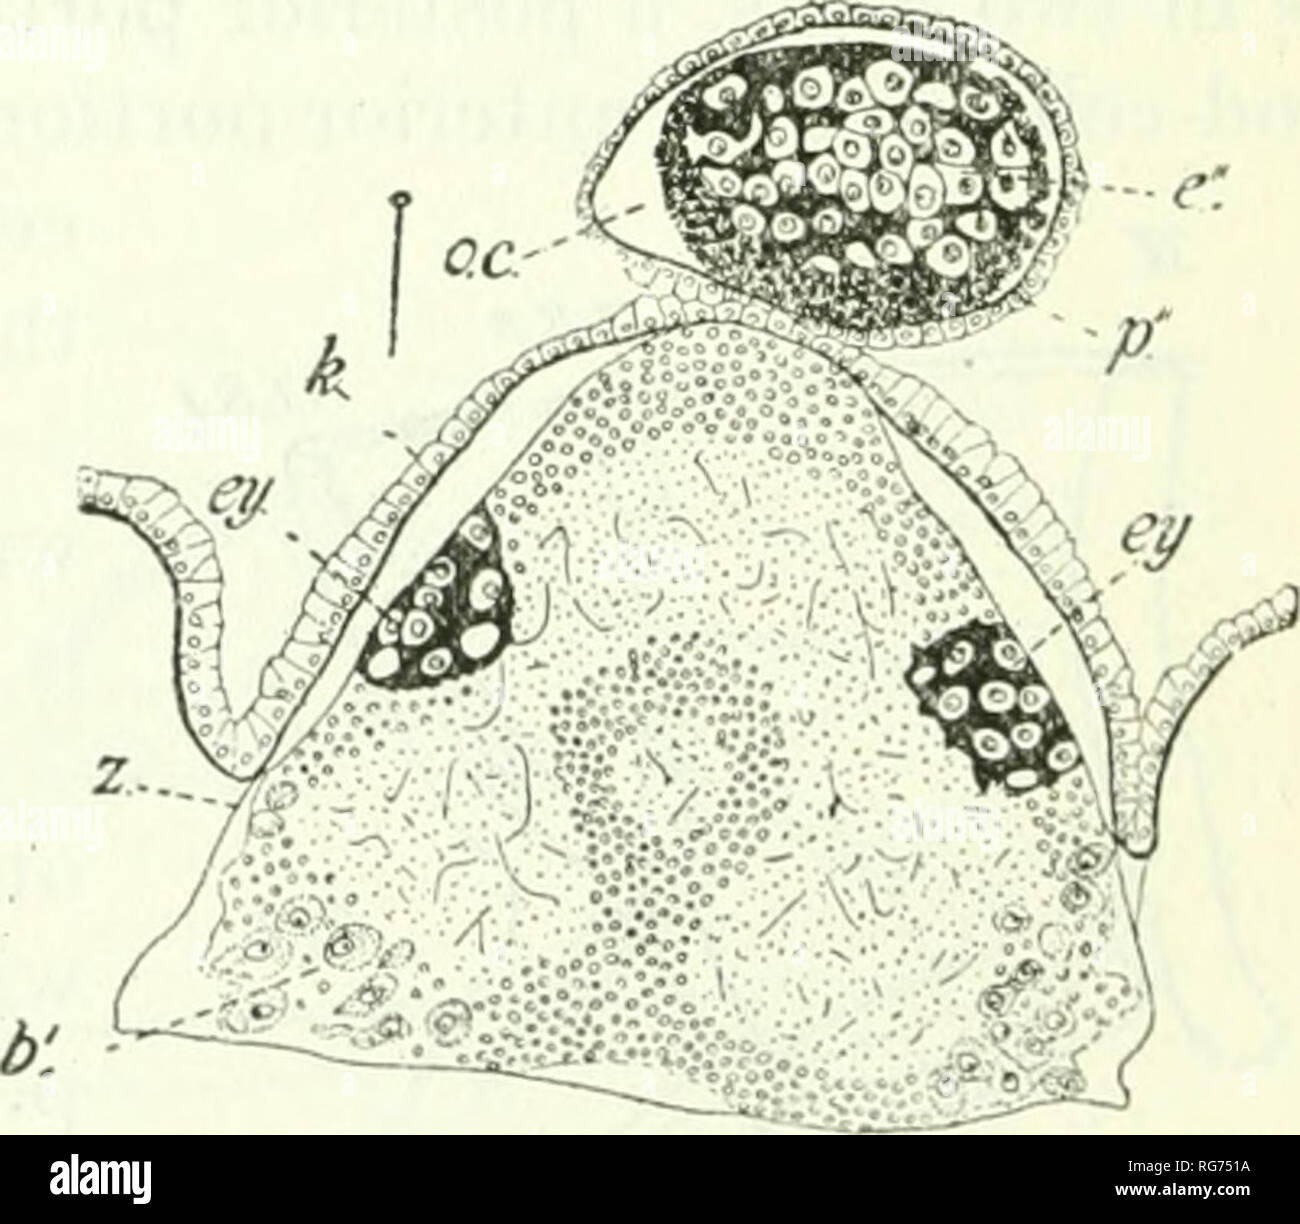 . Bulletin - United States National Museum. Science. Fig. 126.—Pegea confedeeata, aggregated form, somewhat oblique vertical section of the gan- glion and dorsal eyes. x 170 diameters. from Metcalf (1893, c). of the eye (posterior limbs) has its pigment ventral and its rod-cells dorsal and the optic nerve passes up over the limbs of the eye to reach its dorsally lying rod-cells. In Pegea these relations are exactly reversed in the corresponding portions of the eye {e'). The pigment is dorsal and the nerve fibers reach the rod-cells di- rectly from the ganglion. Of course, if no inversion has o Stock Photo